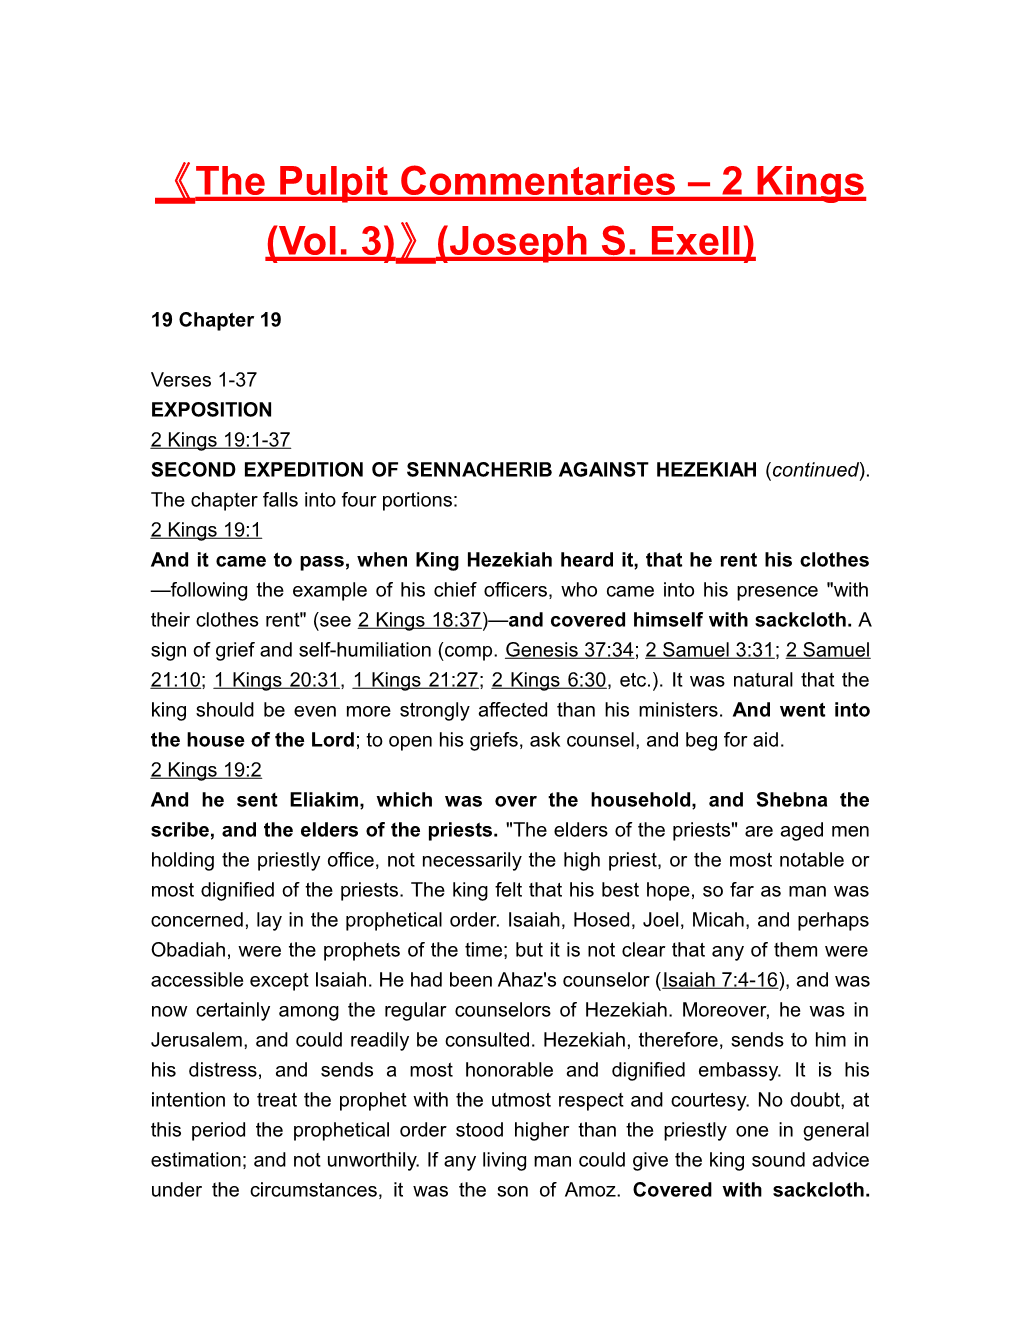 The Pulpit Commentaries 2 Kings (Vol. 3) (Joseph S. Exell)